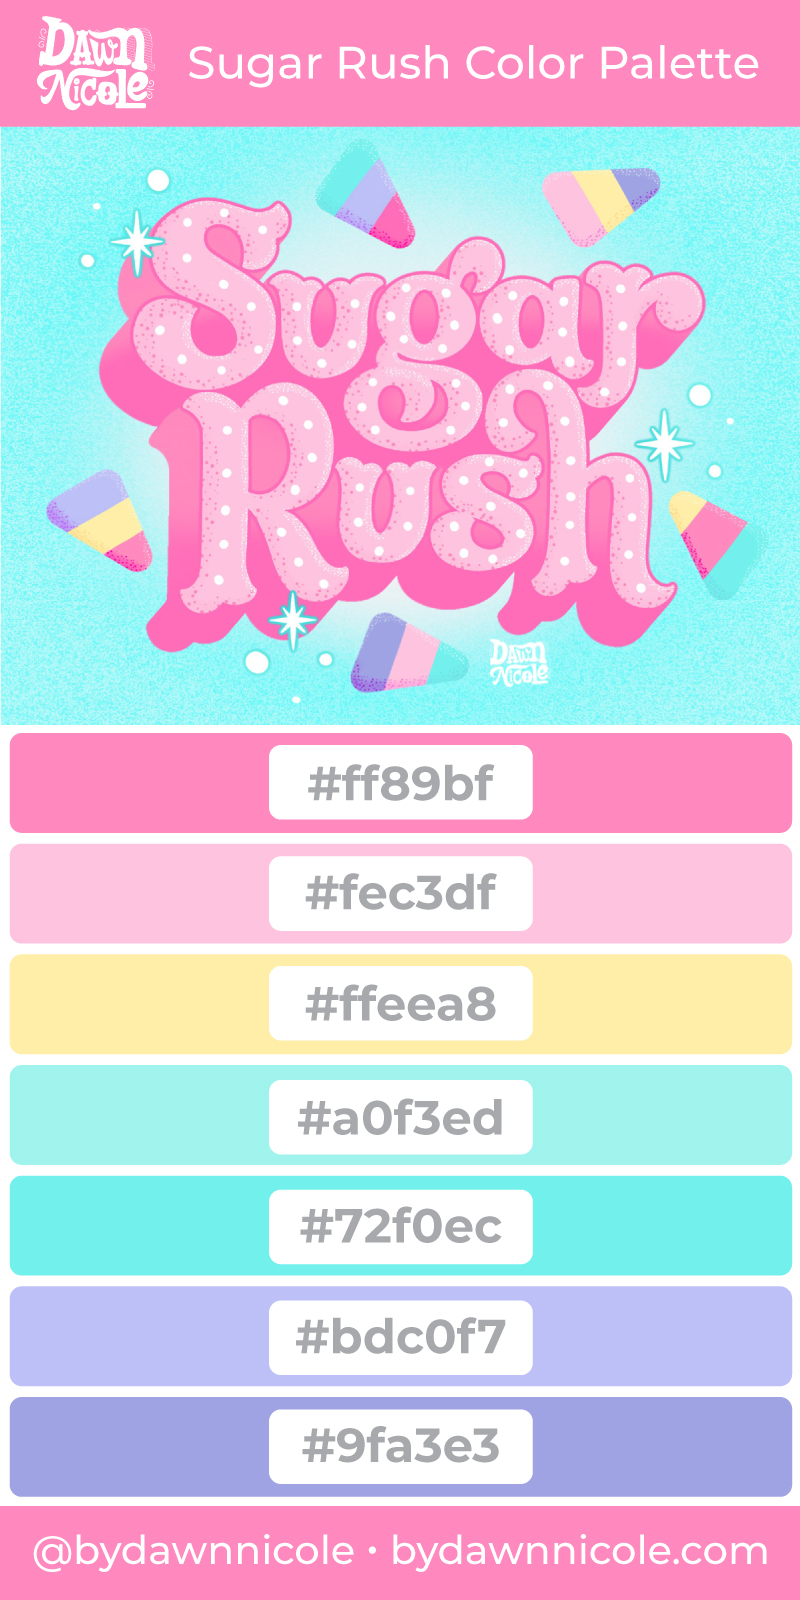 Sugar Rush Color Palette. Grab the free color palette I used to create this "Sugar Rush" hand lettering in the Procreate app!